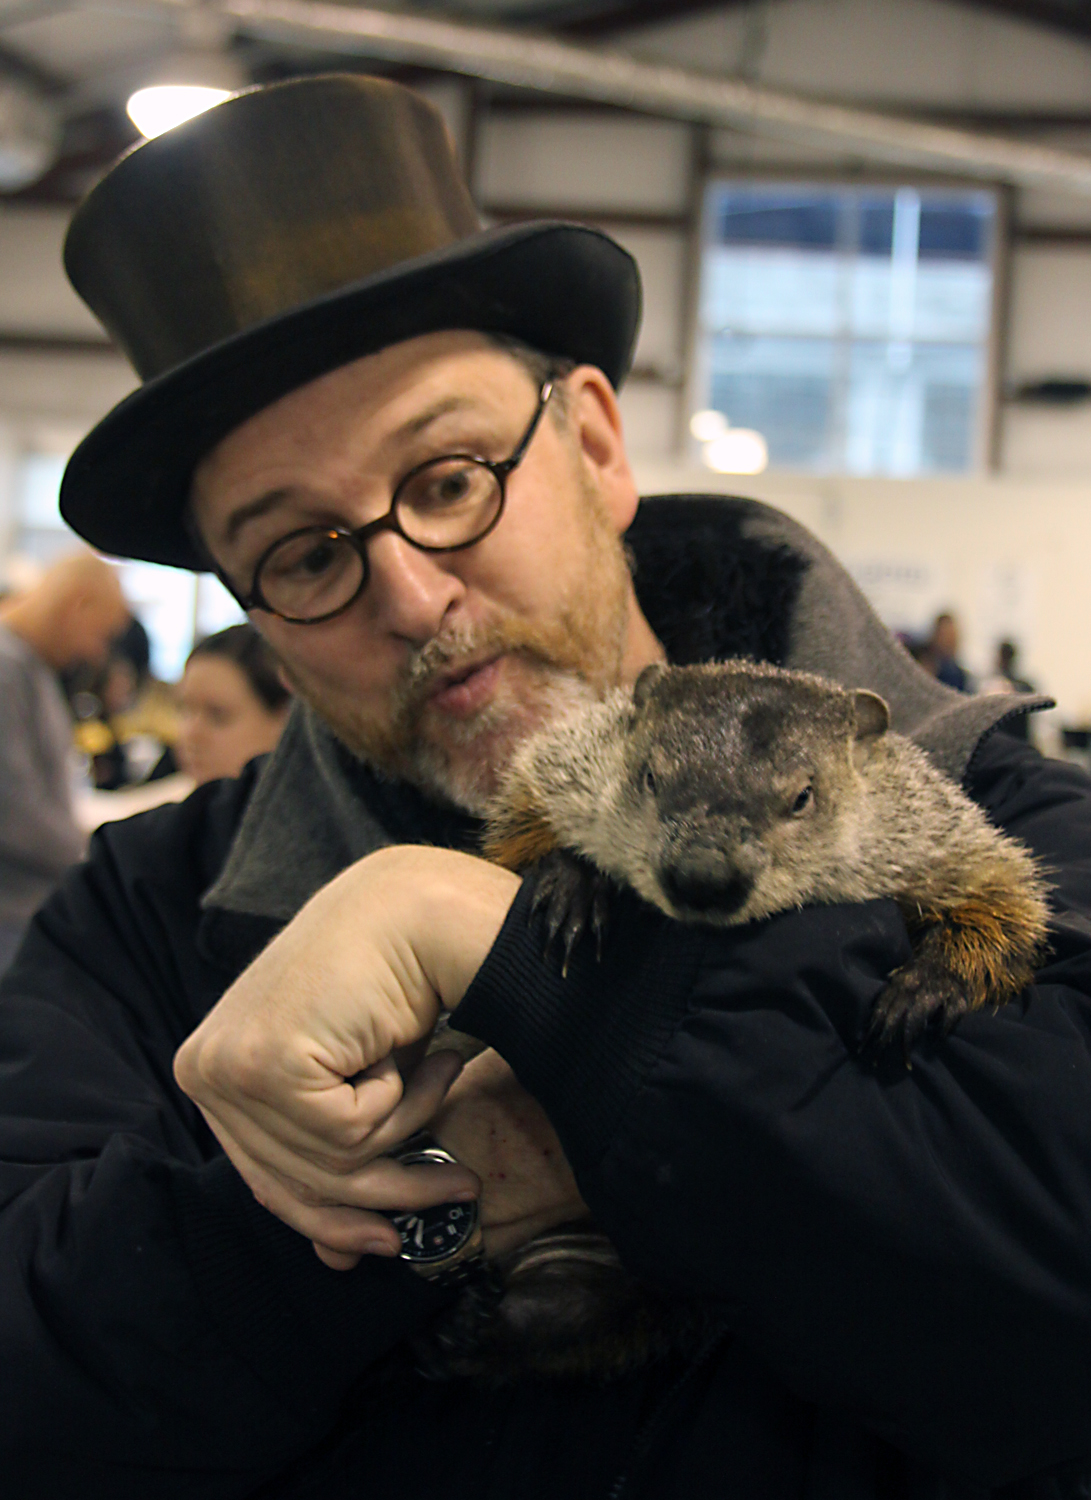 Ben Hughes, Phil's handler, holds the groundhog up for a photo before taking a break.